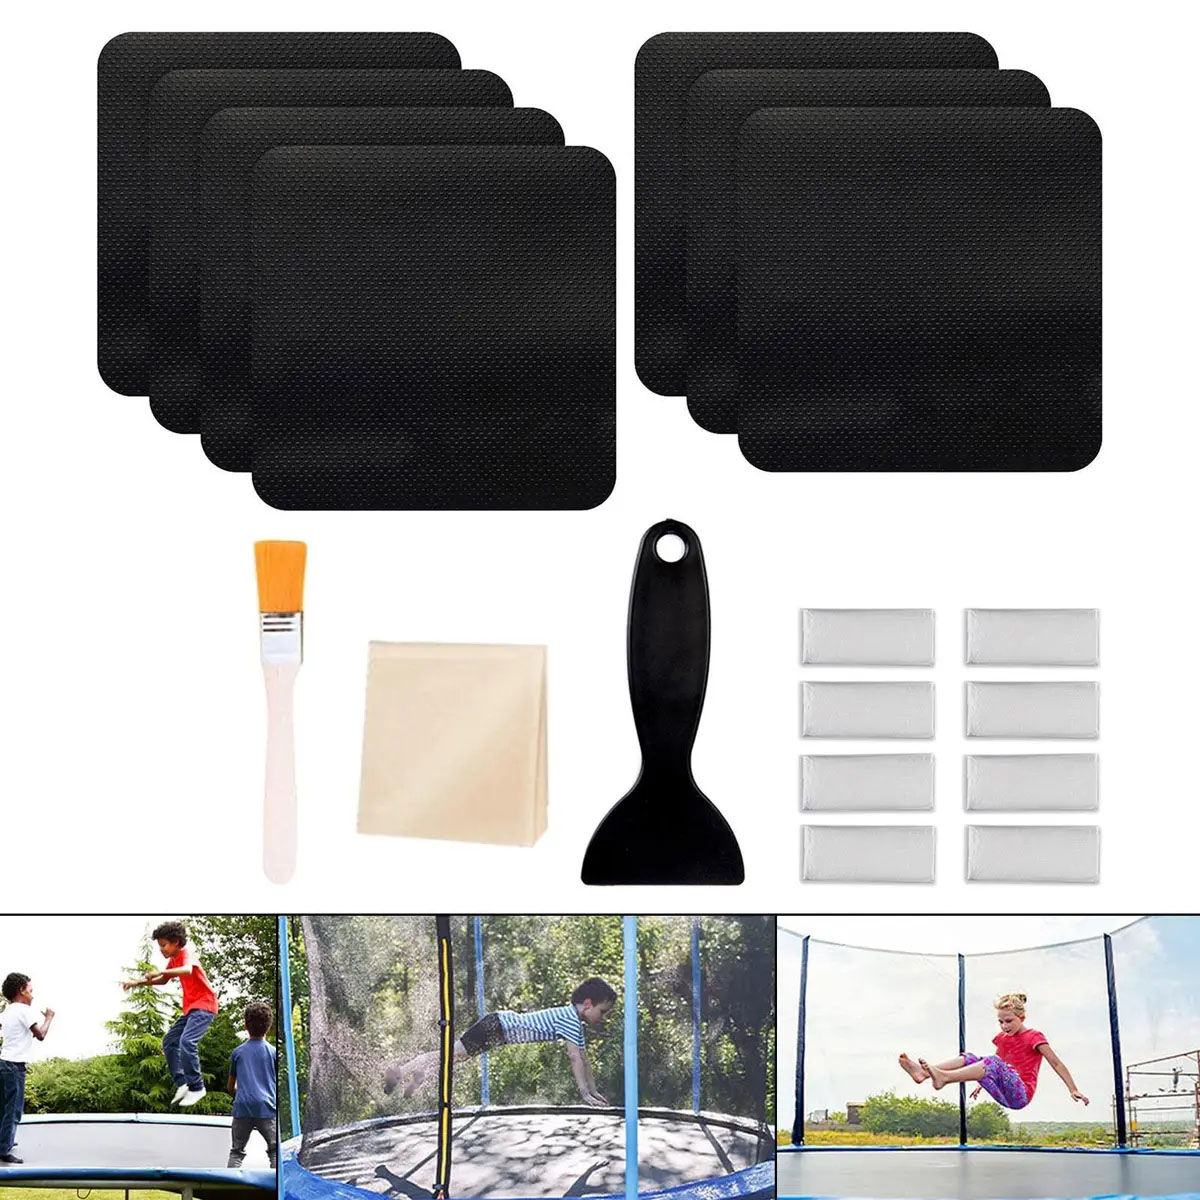 ifeolo Trampoline Patch Repair Kit 4 inch Circle On Patches